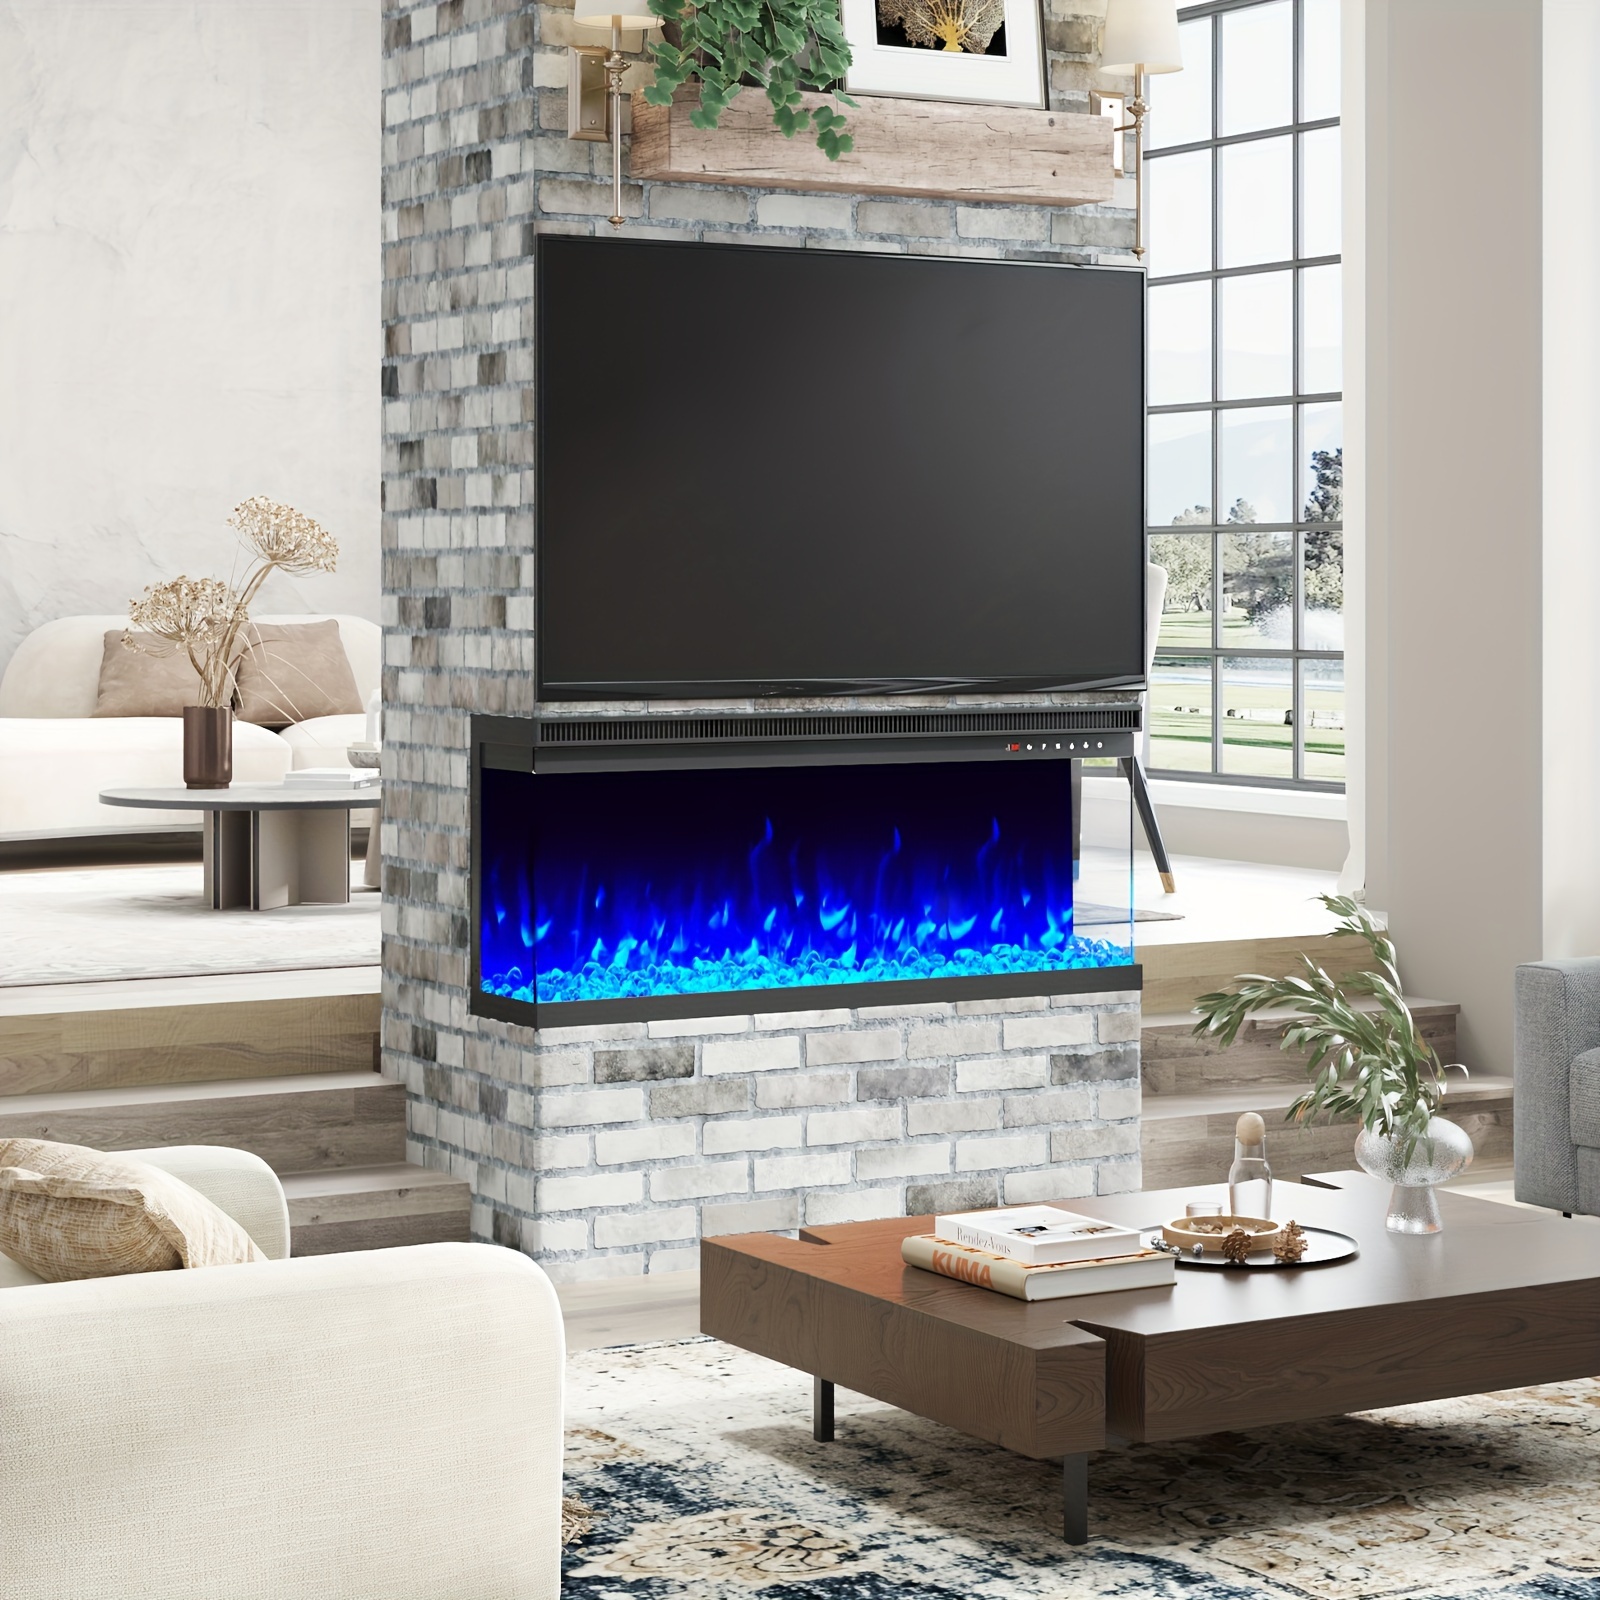 

3 Sided Electric Fireplace Of Tempered Glass Panels & Log And Crystal, Fireplace Heater With 9 Flame Colors & 5 Brightness Levels & 2 Power Modes, Noisy Free, Recessed